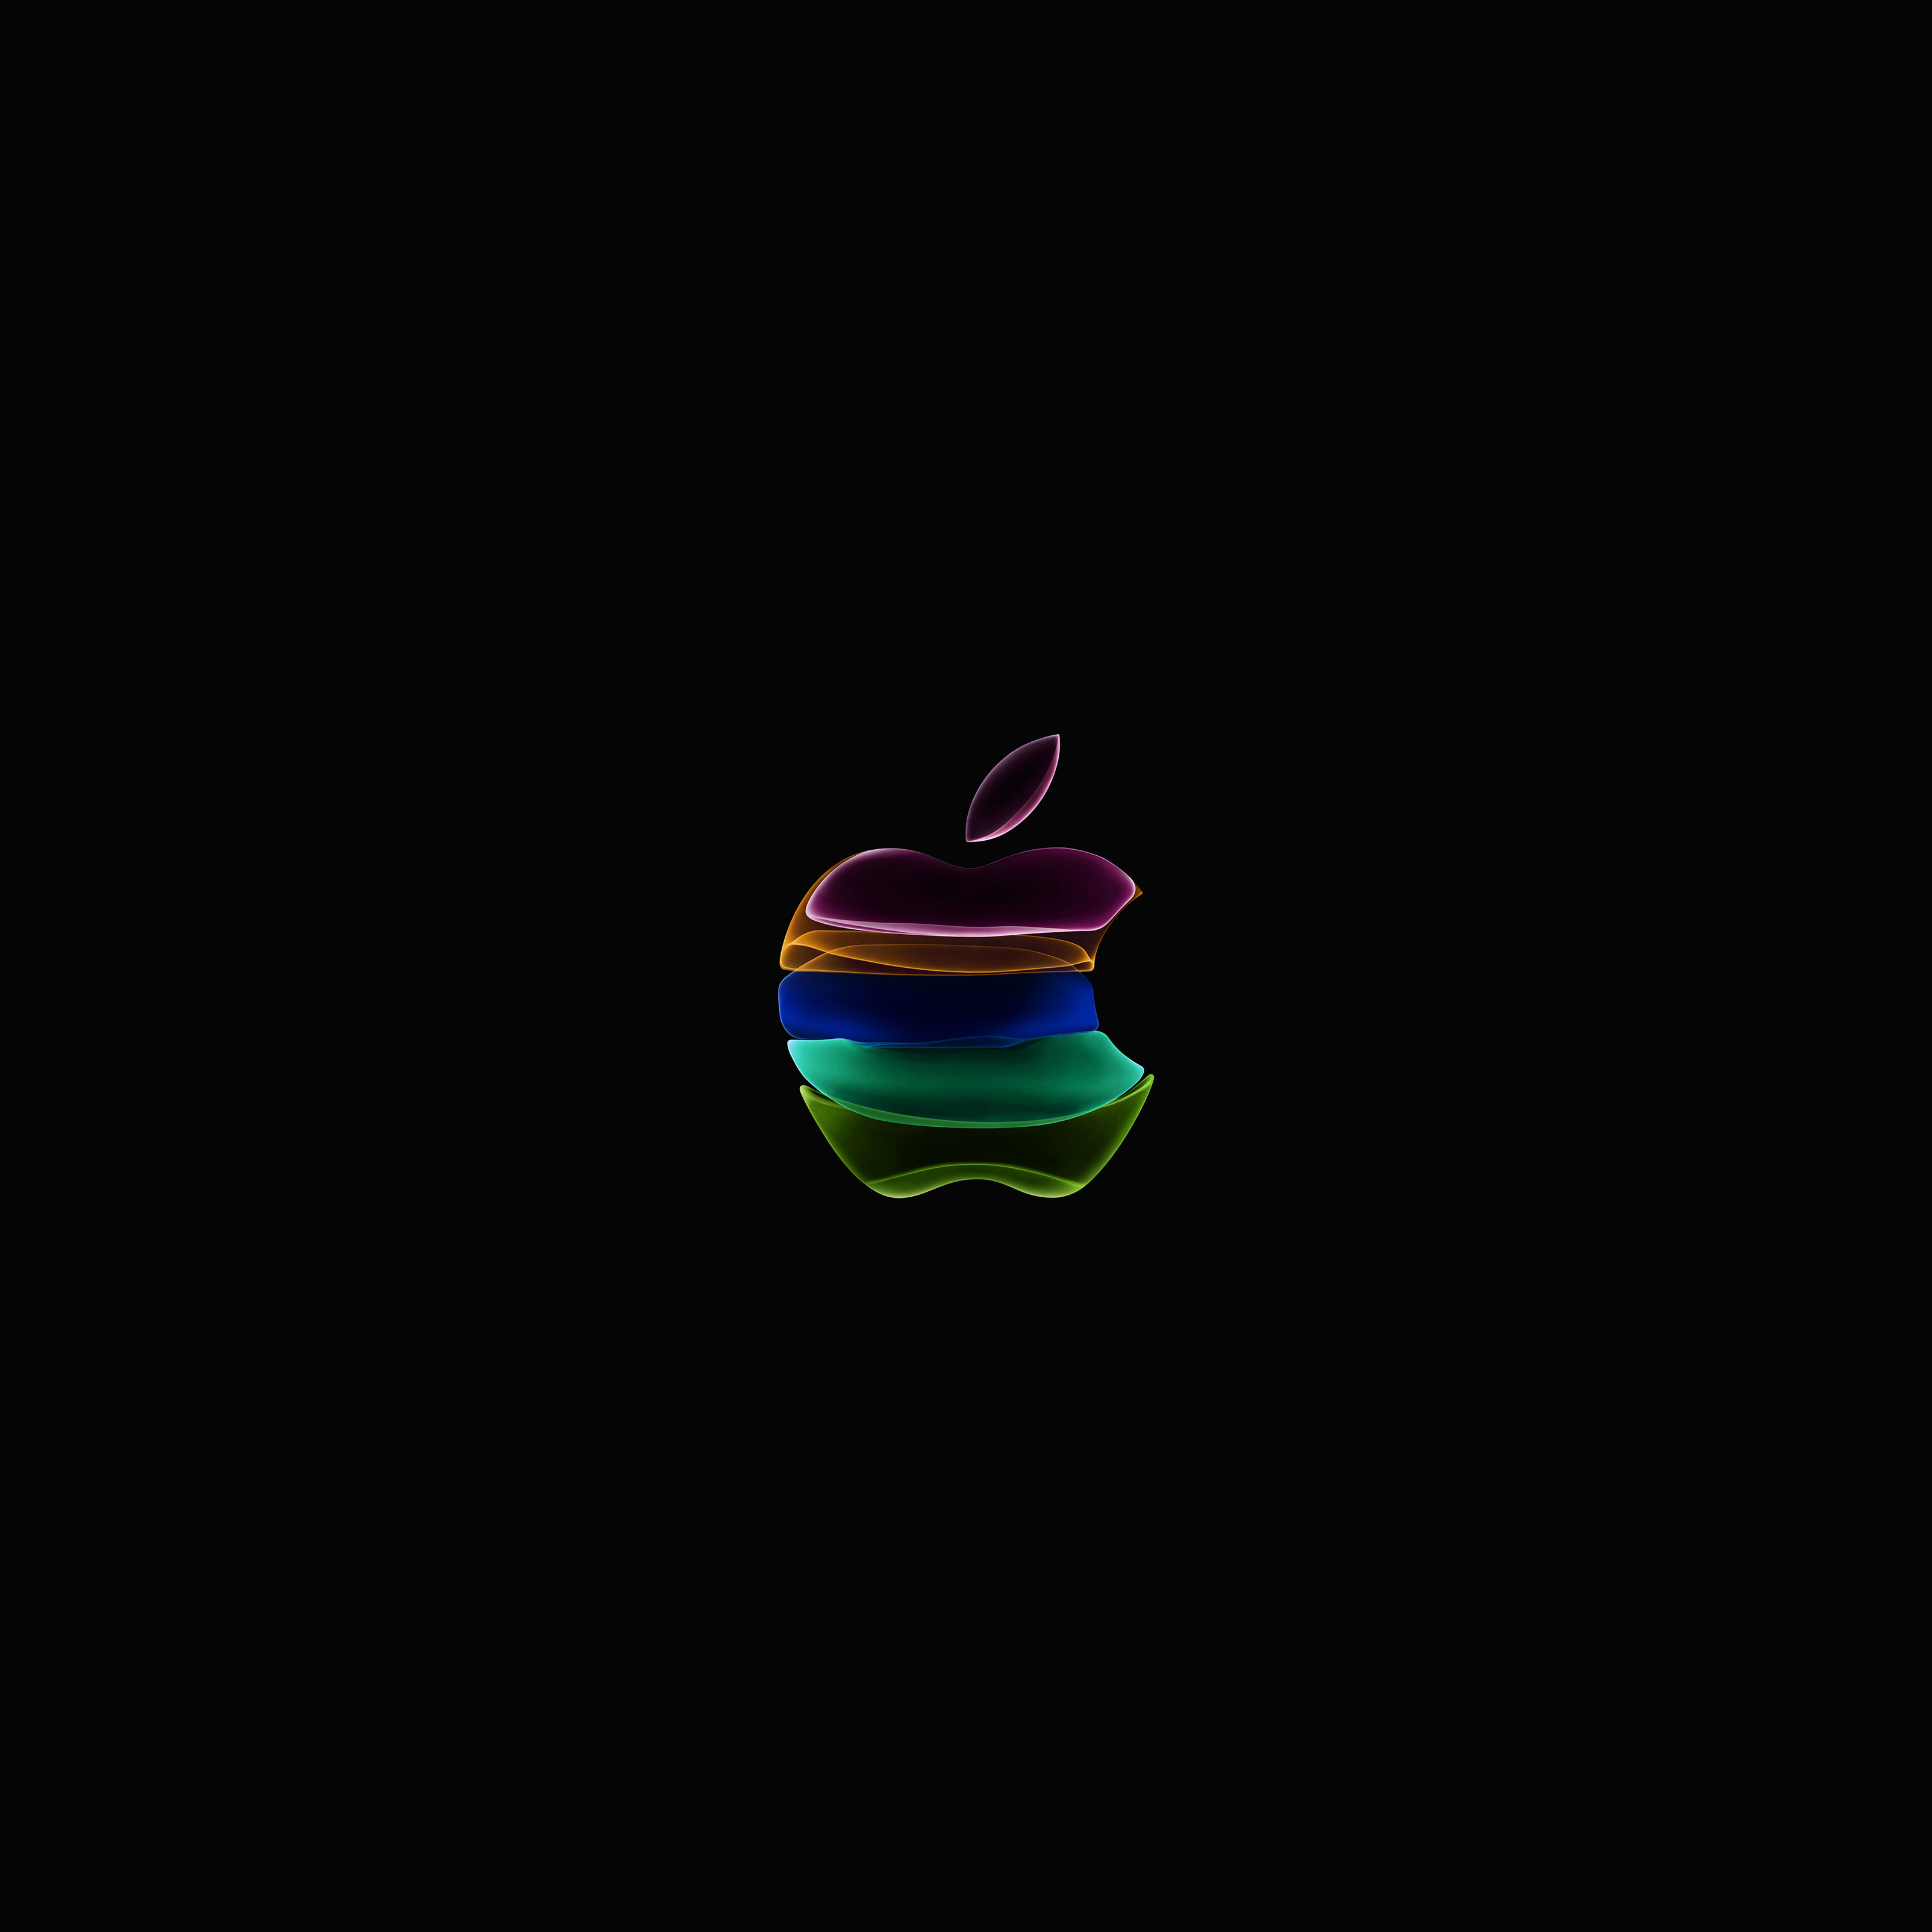 Aggregate more than 76 apple event wallpaper 2019 best